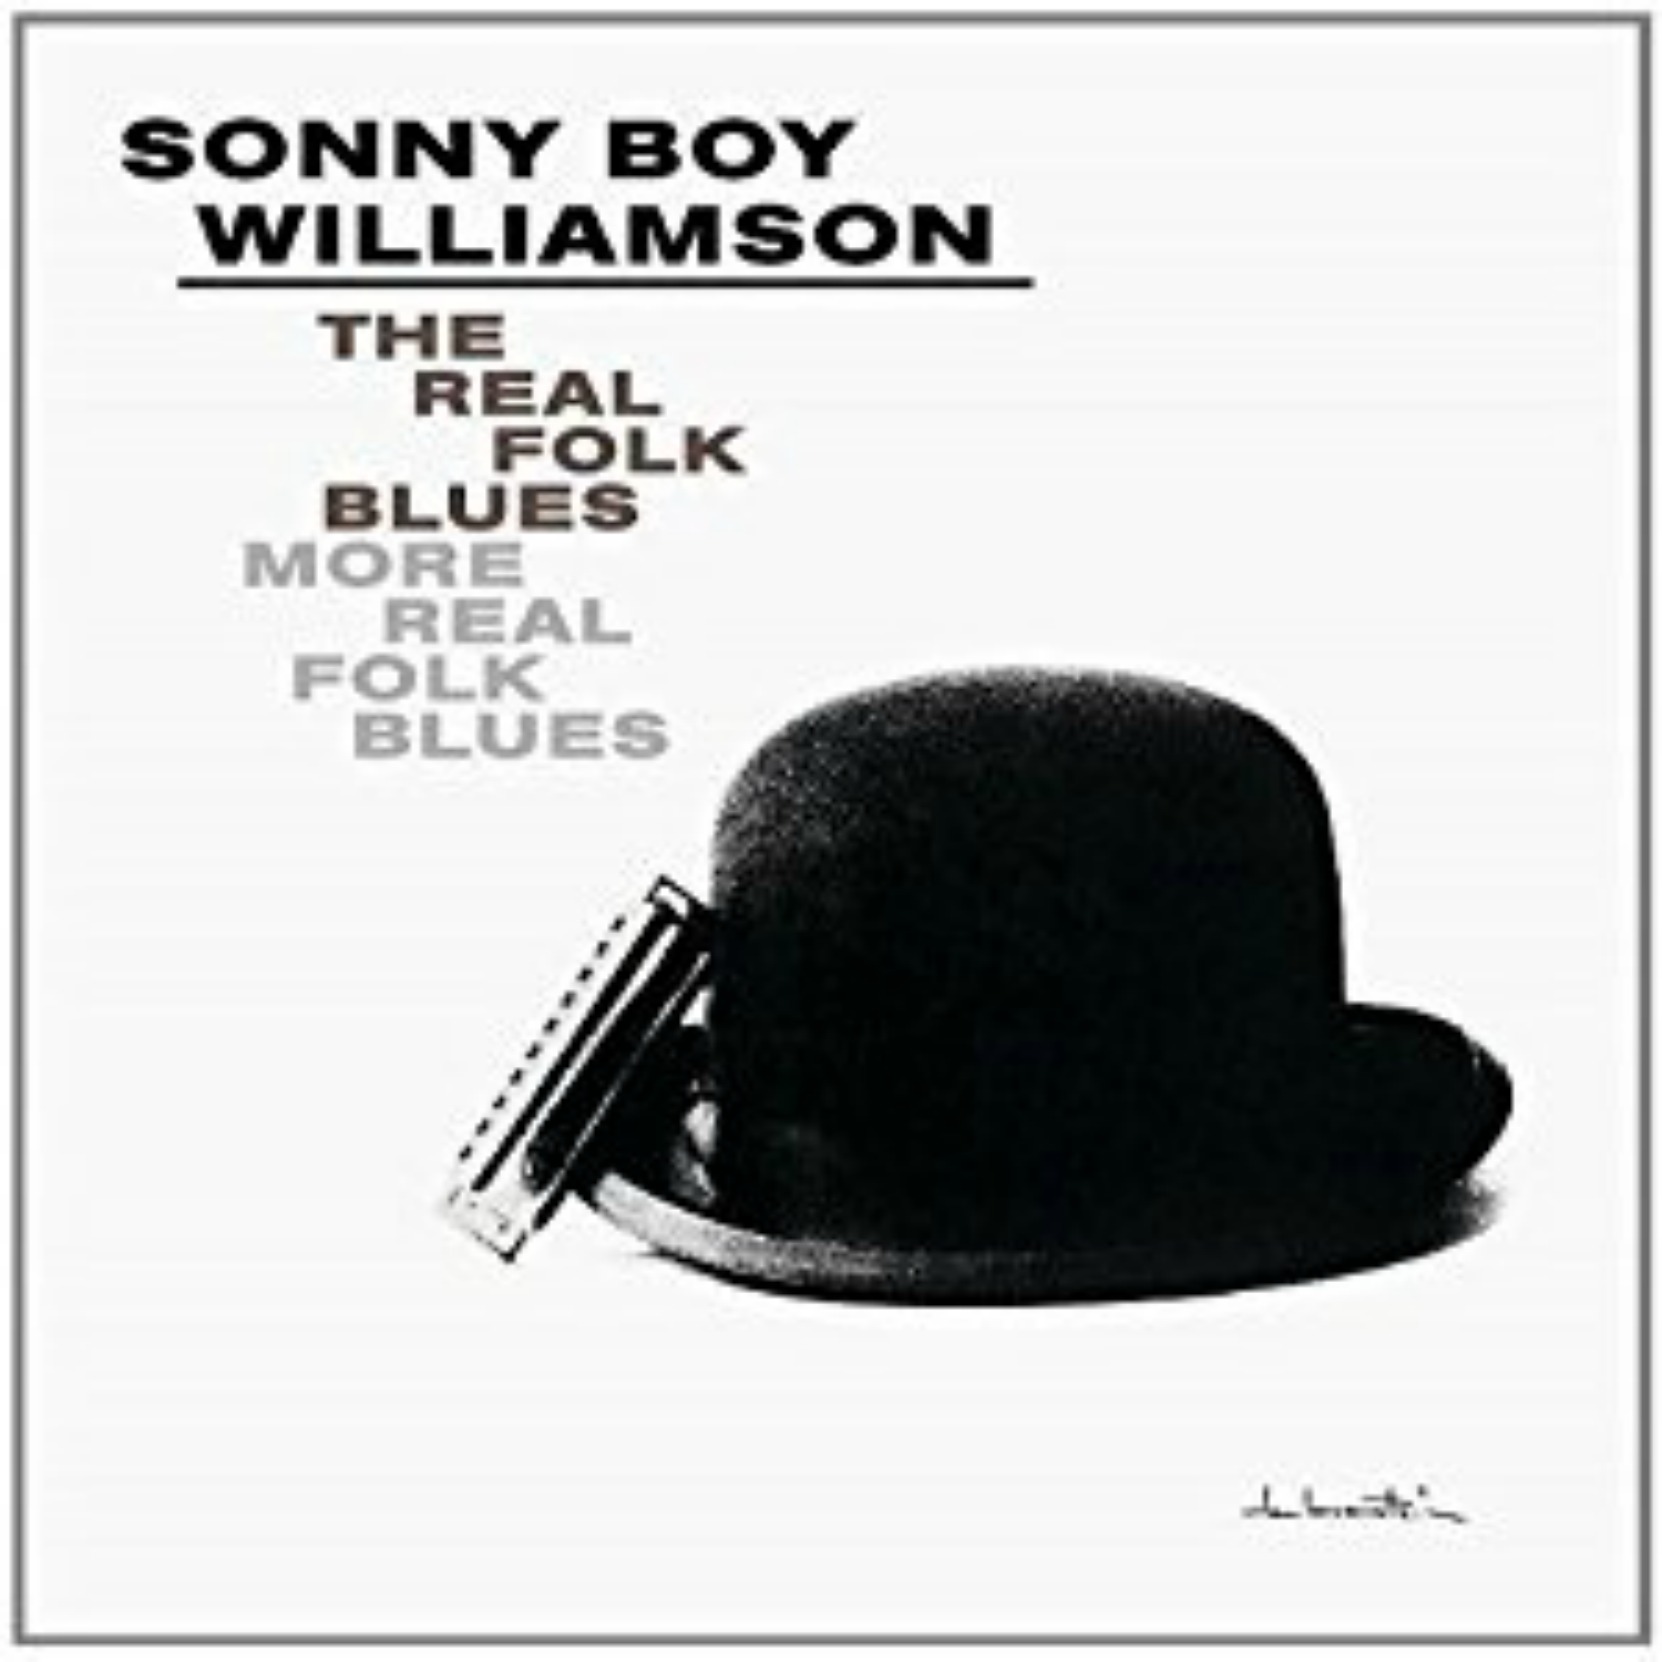 The Real Folk Blues/More Real Folk Blues by Sonny Boy Williamson, album cover